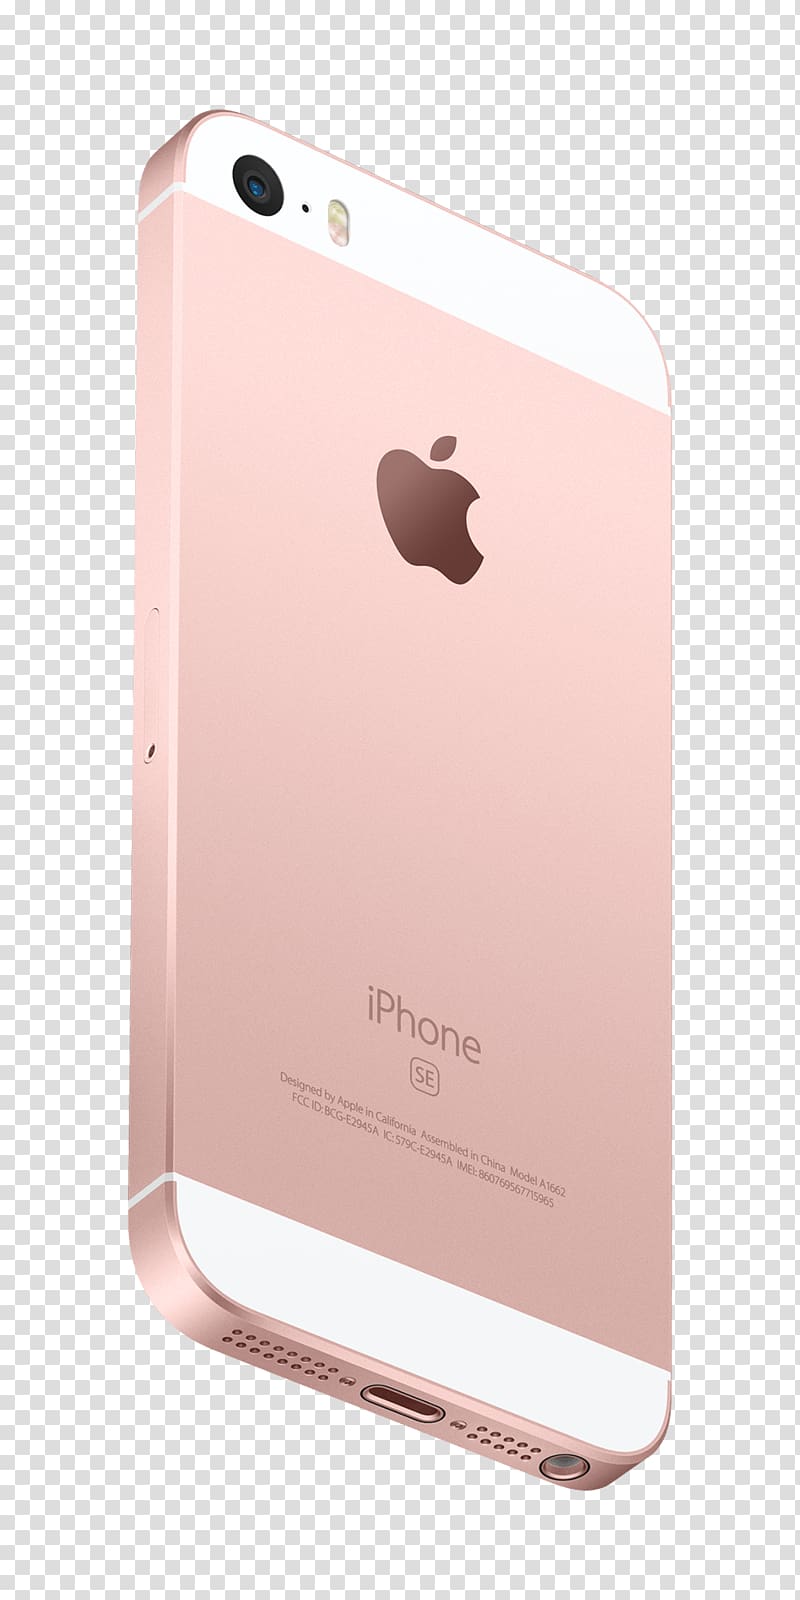 iPhone SE iPhone 4S iPhone 5s Apple rose gold, apple transparent background PNG clipart